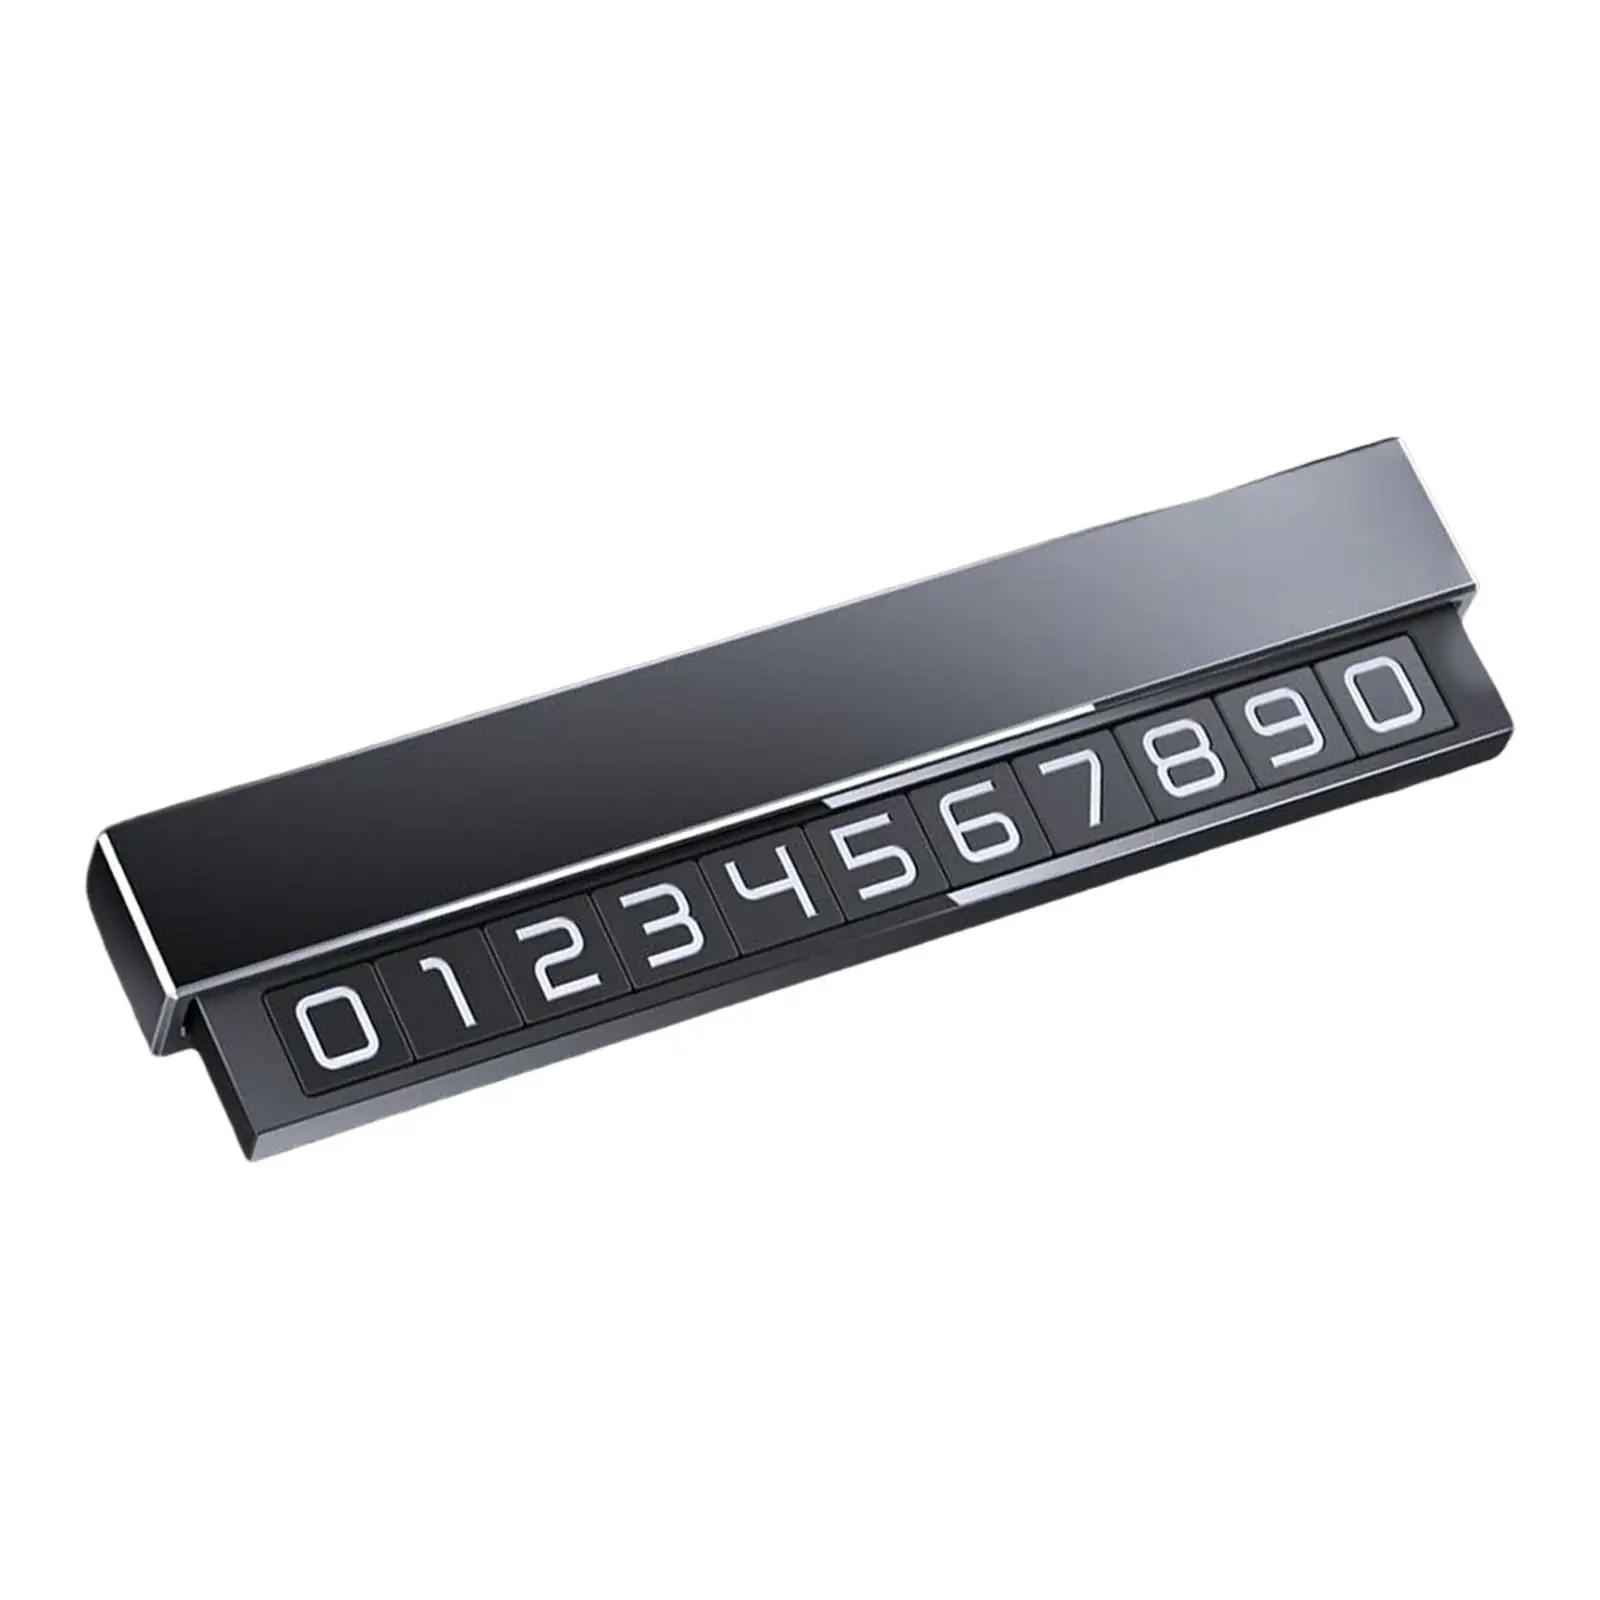 Parking Number Plate Car Styling Parts Hidden Moving Creative Luminous phone Number Card Plate for Cars Dashboard